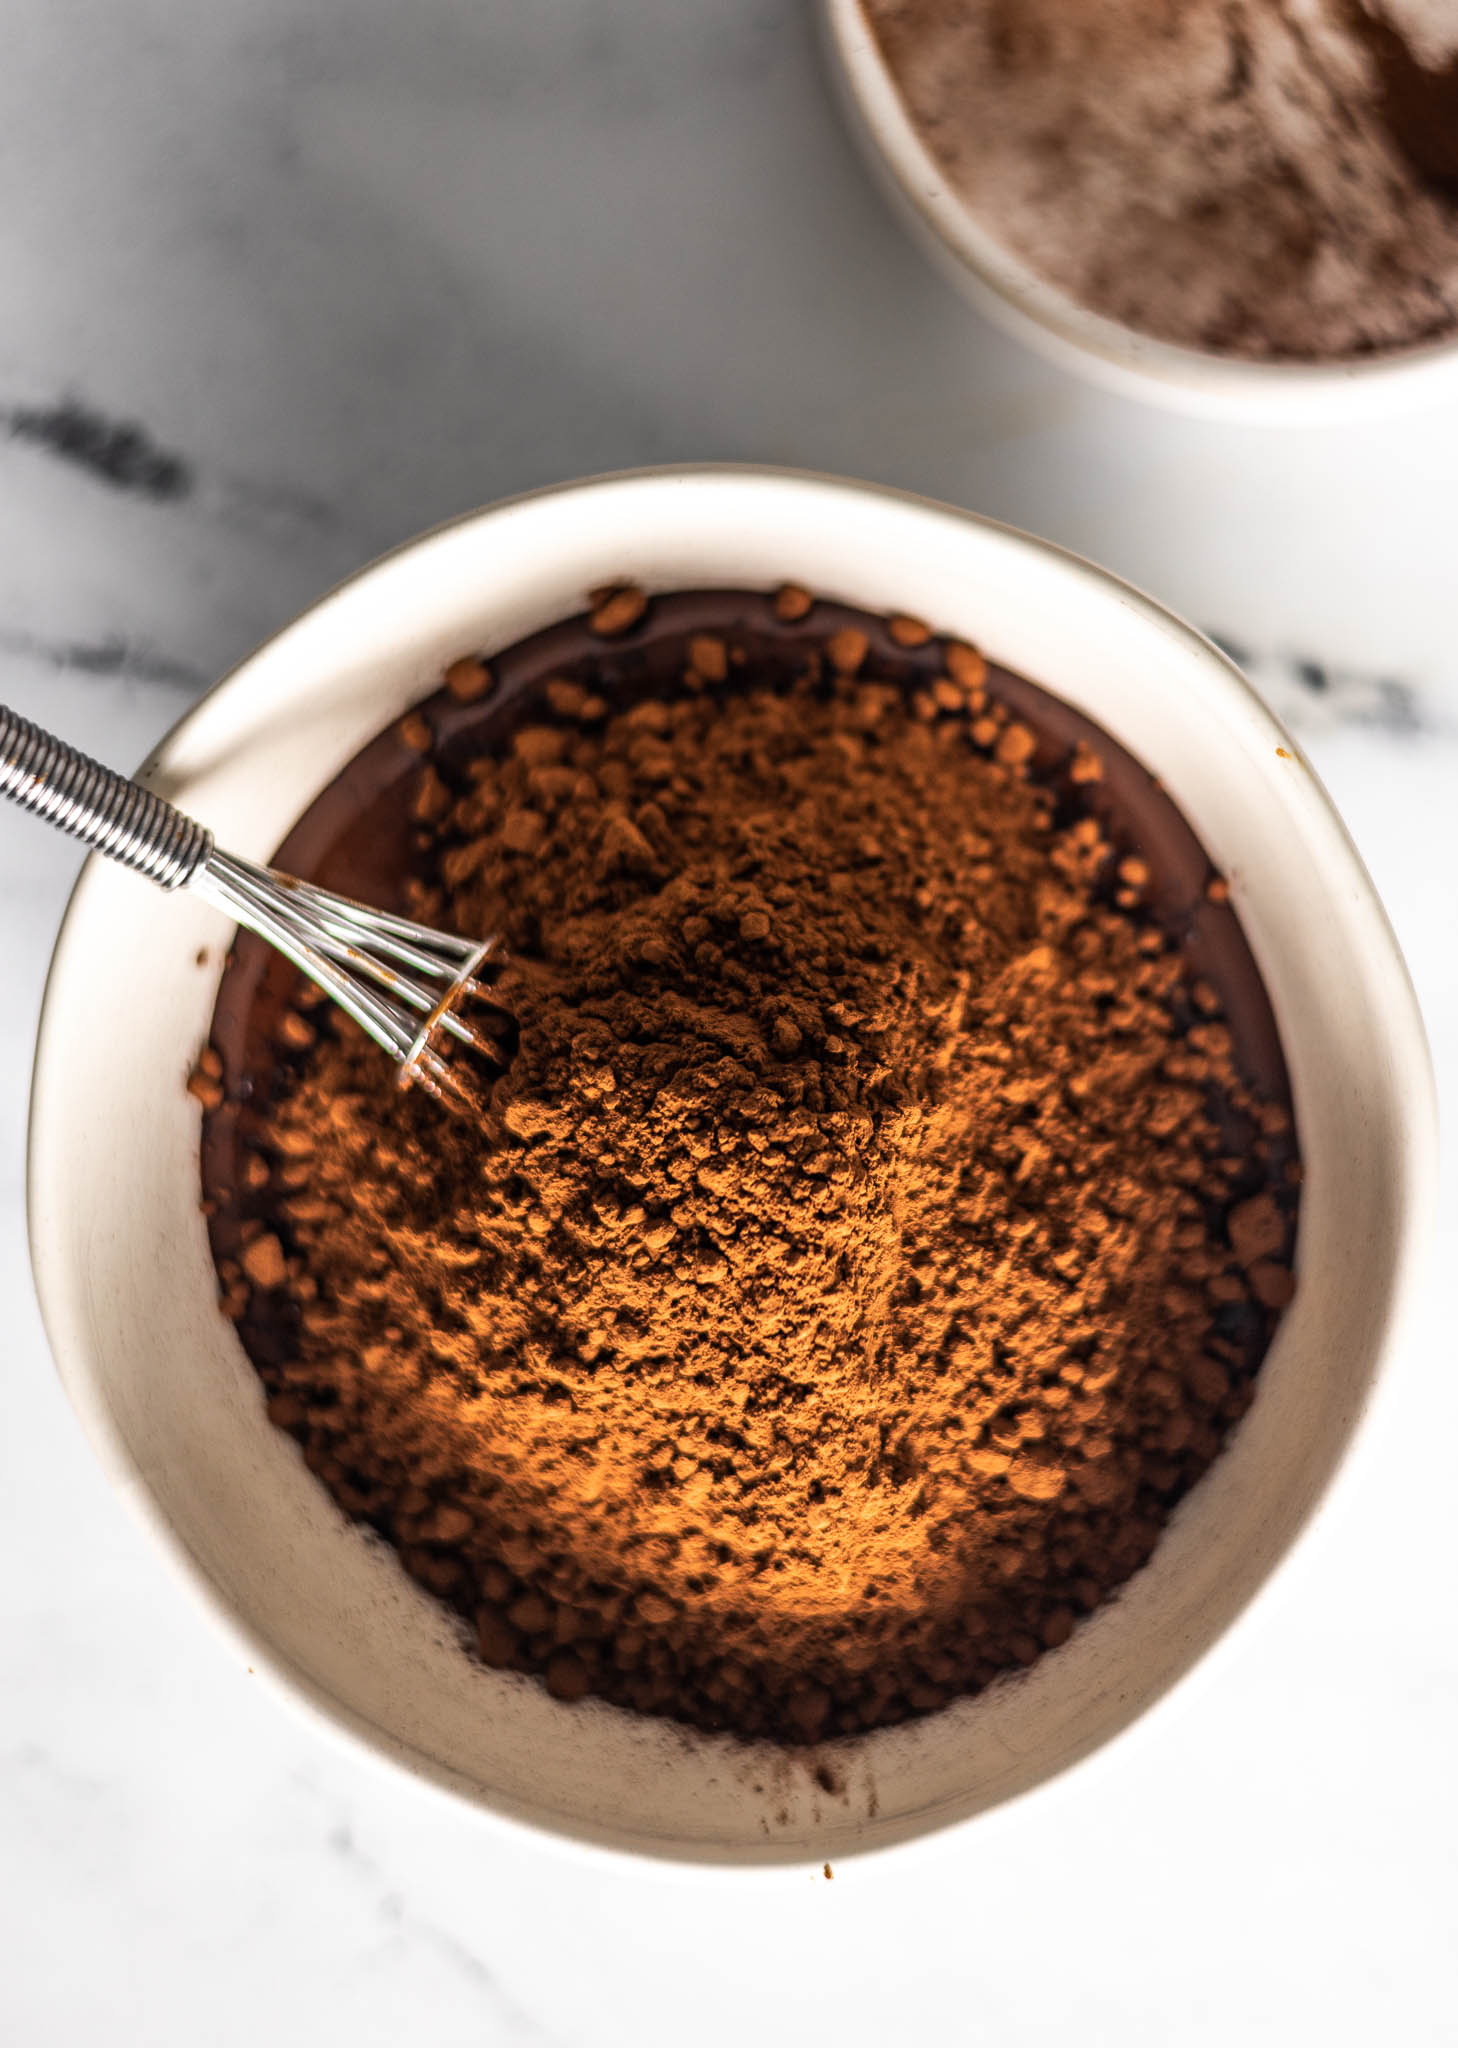 Cocoa powder that has been added to the bowl of melted butter and semi-sweet chocolate chips